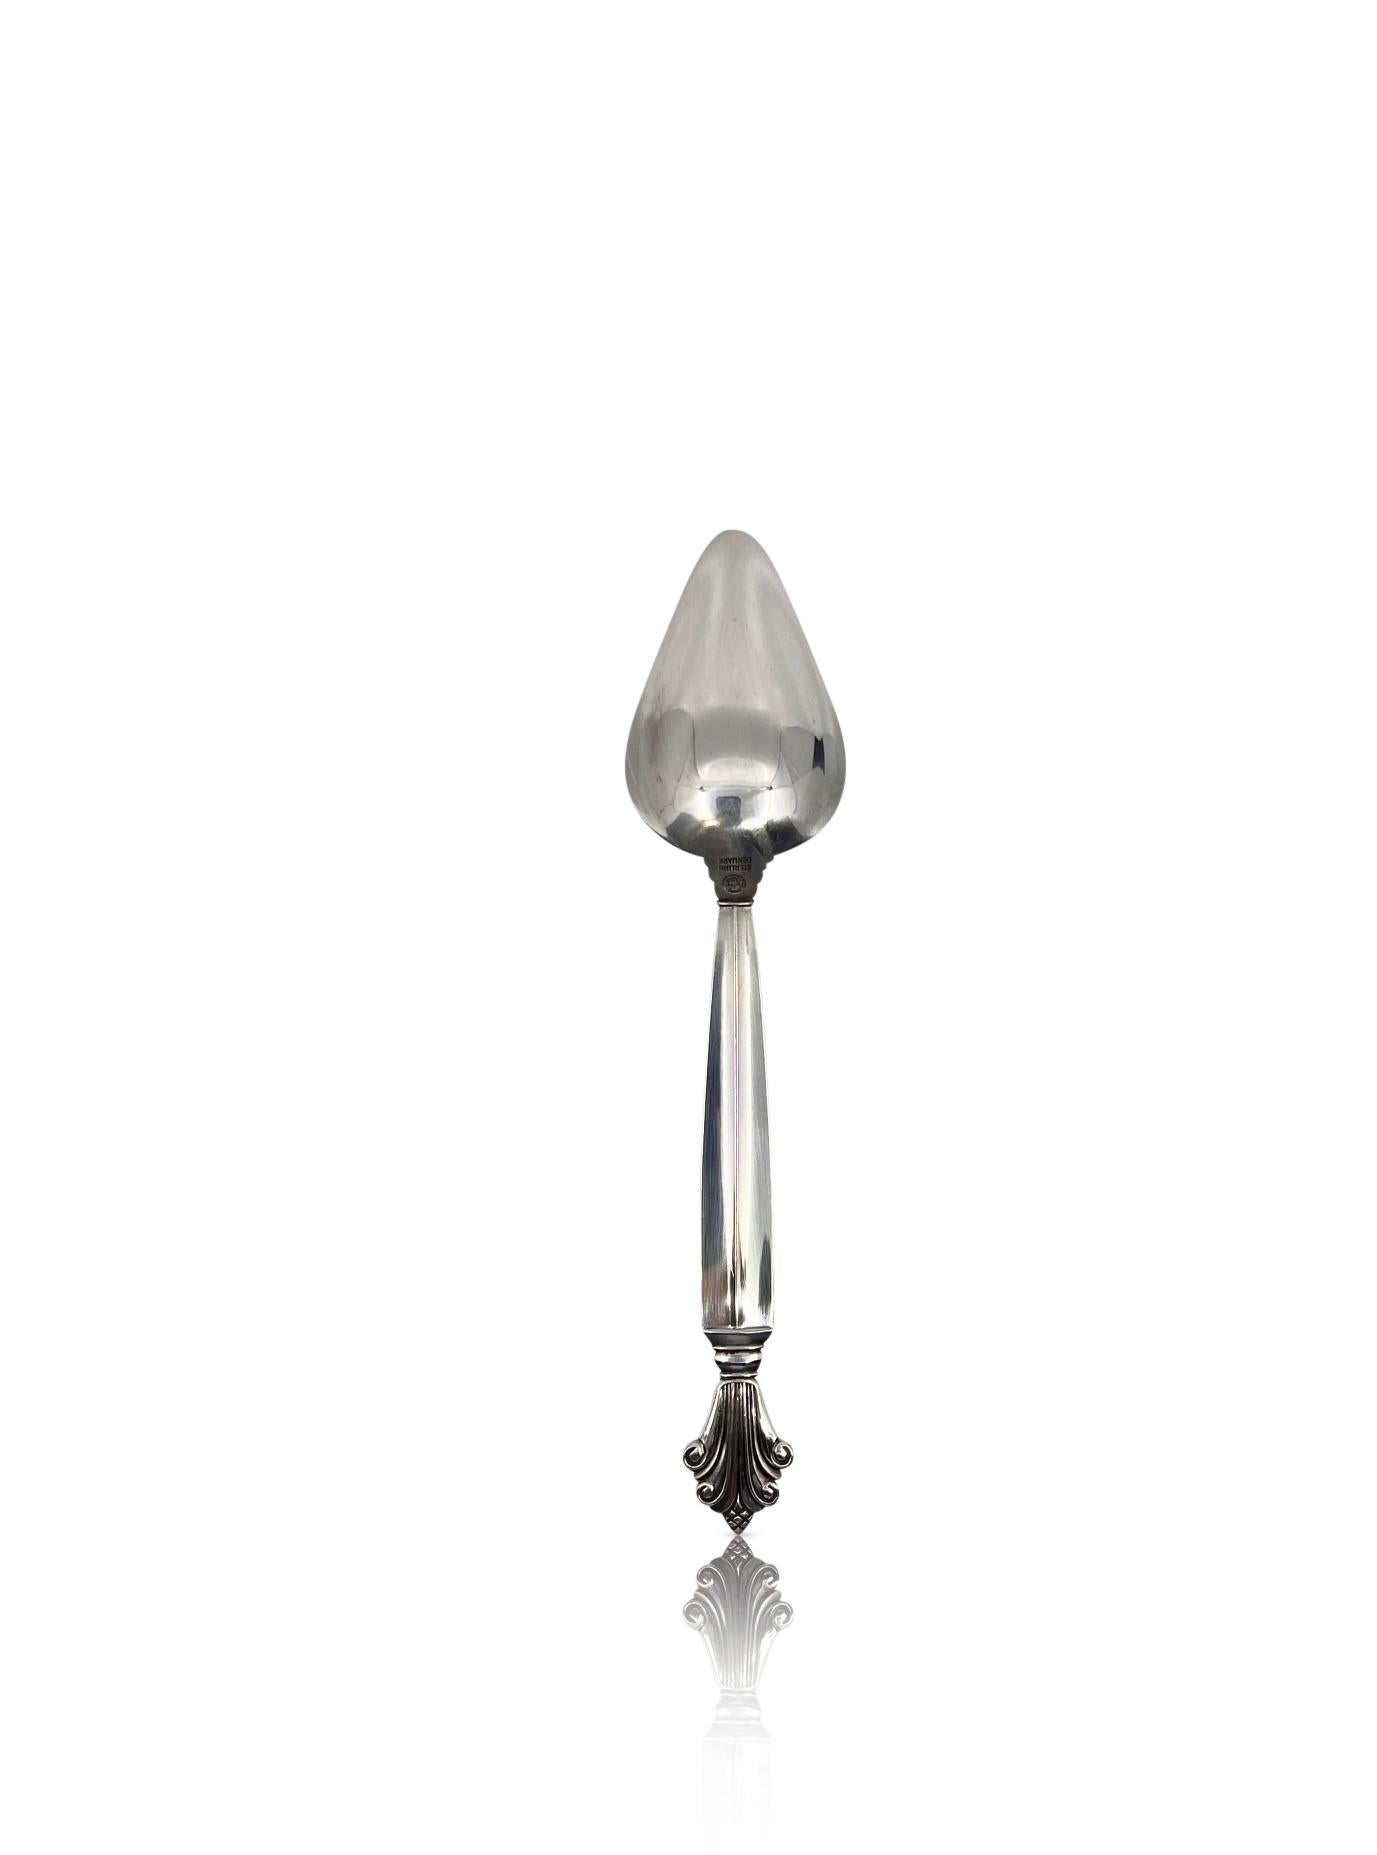 Georg Jensen sterling silver grapefruit spoon, item #075 in the Acanthus pattern, flatware design #180 by Johan Rohde from 1917.

Additional information:
Material: Sterling silver
Styles: Art Nouveau
Hallmarks: With Georg Jensen hallmark, made in